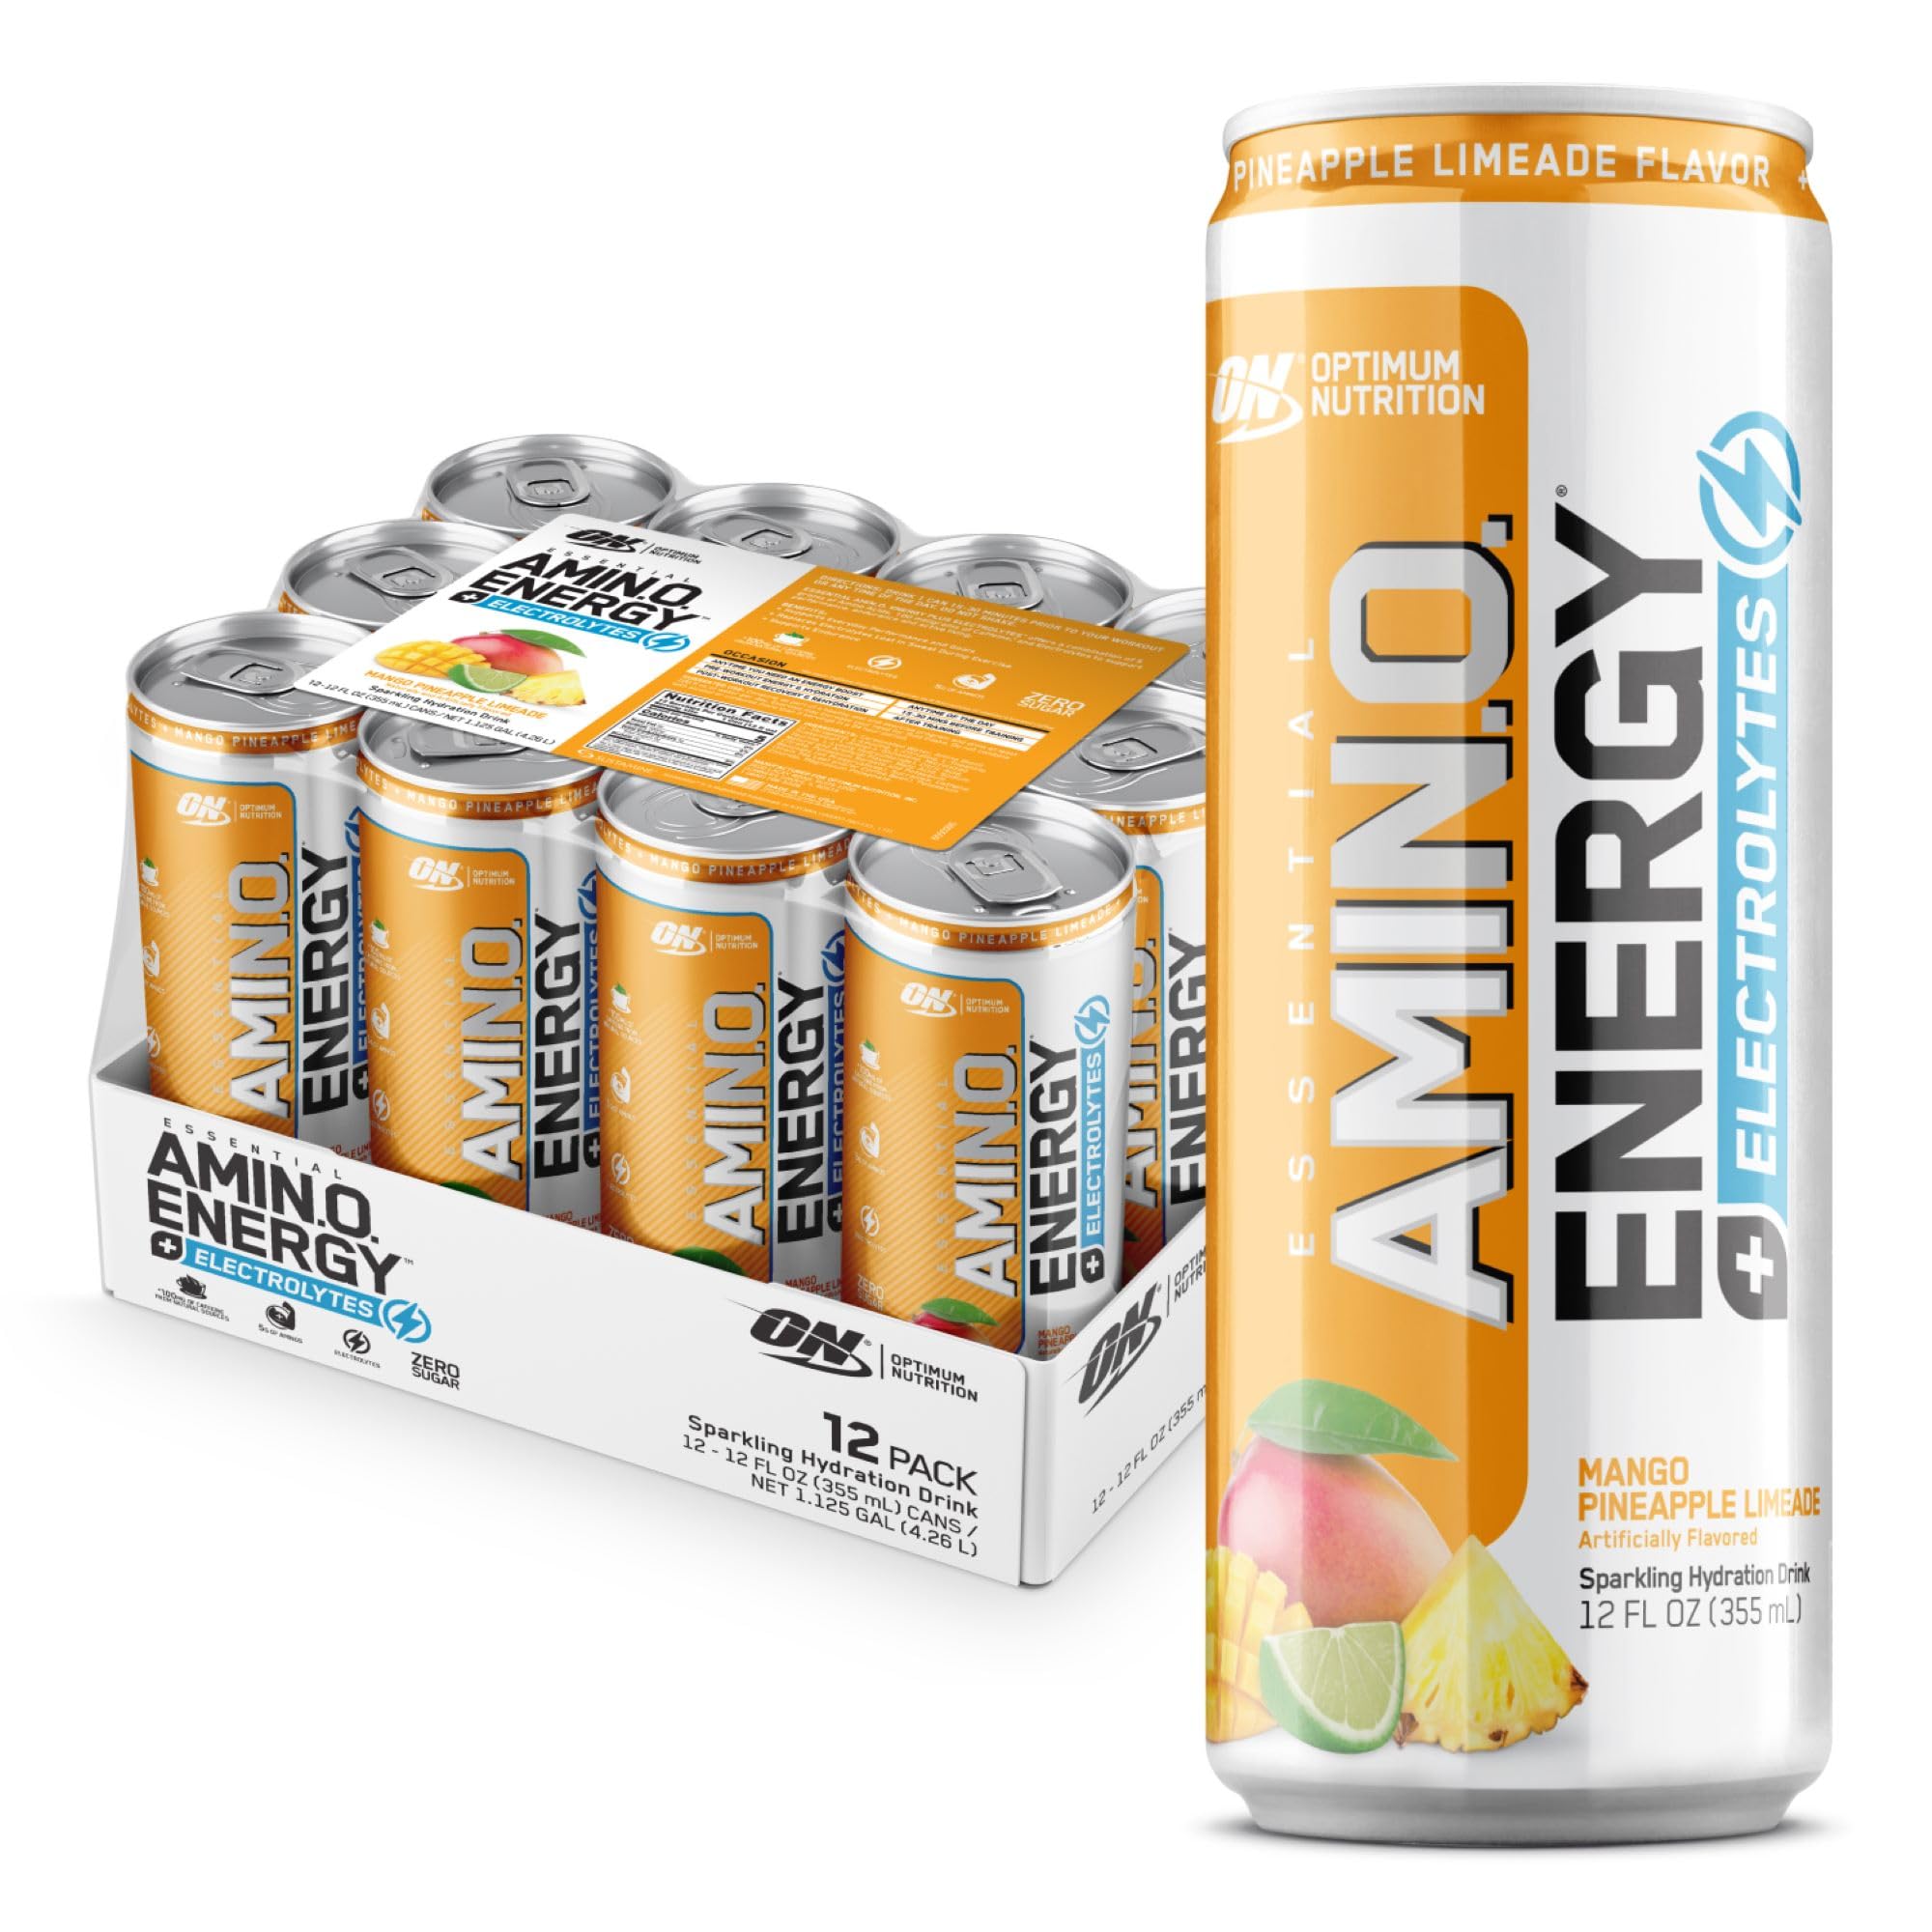 Optimum Nutrition Amino Energy Drink Plus Electrolytes for Hydration, Sugar Free, Caffeine for Pre-Workout Energy and Amino Acids/BCAAs for Post-Workout Recovery - Mango Pineapple Limeade (12 Pack)